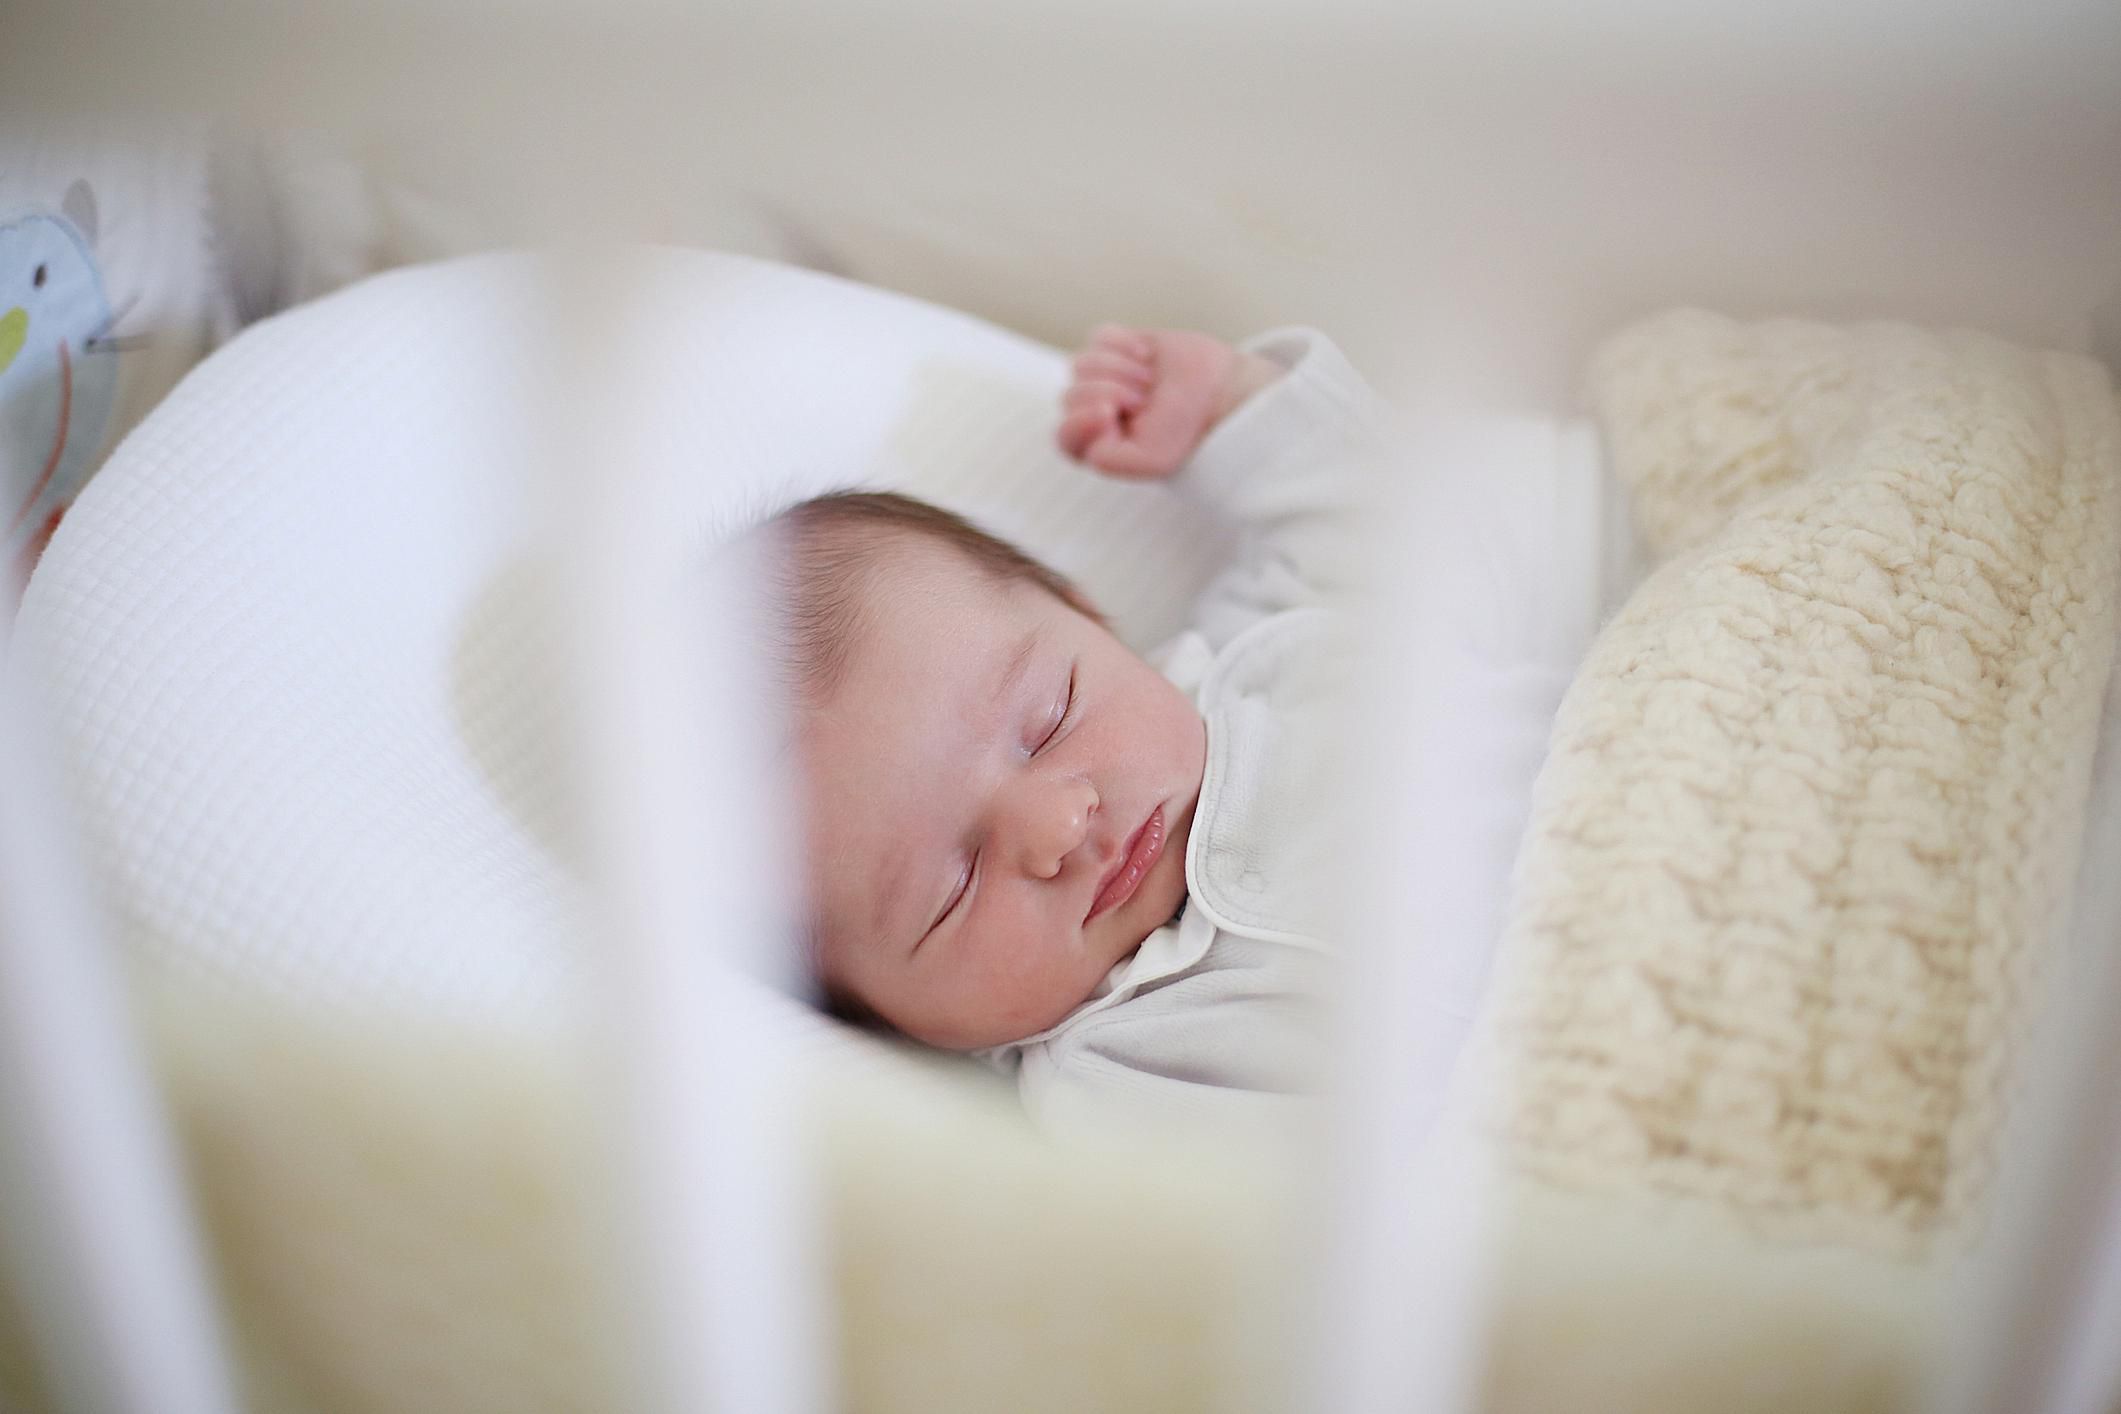 Infant Sleep Positioners - A Safety Warning